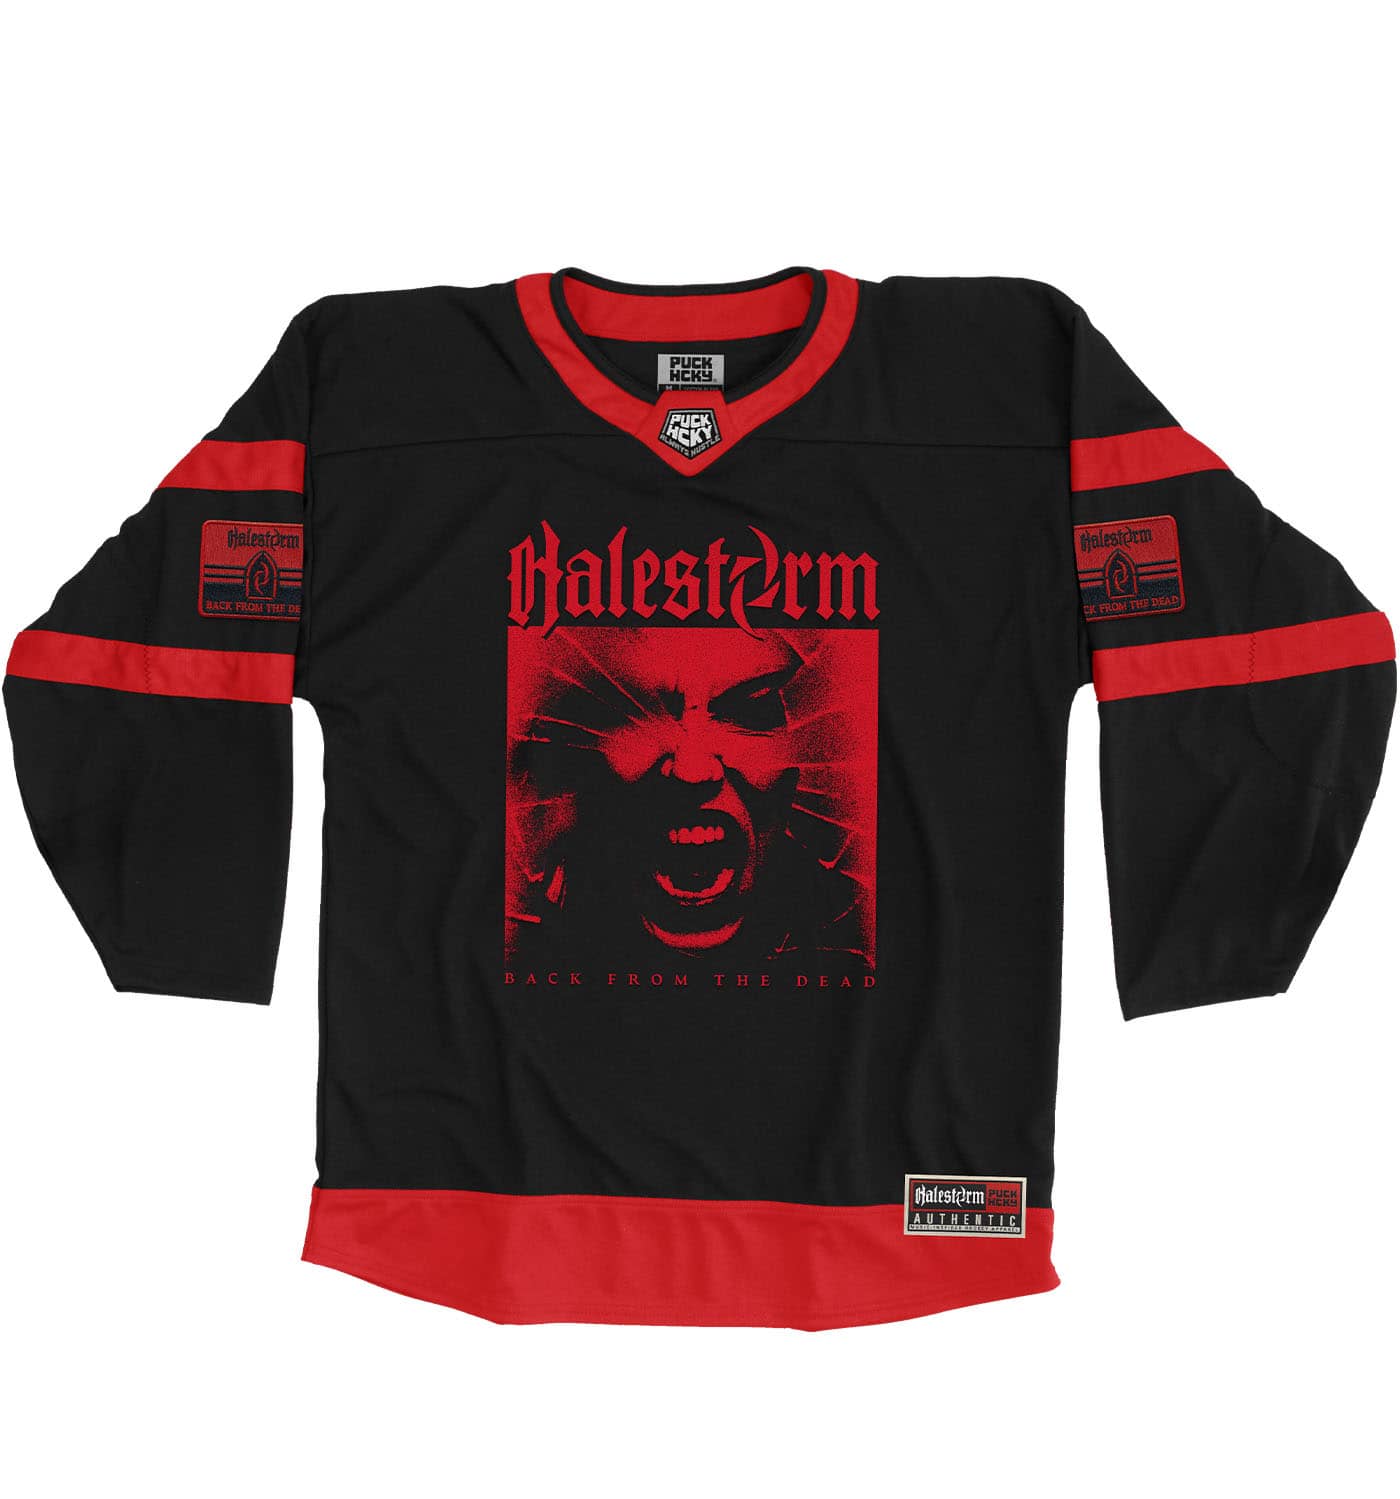 HALESTORM ‘BACK FROM THE DEAD’ hockey jersey in black and red front view